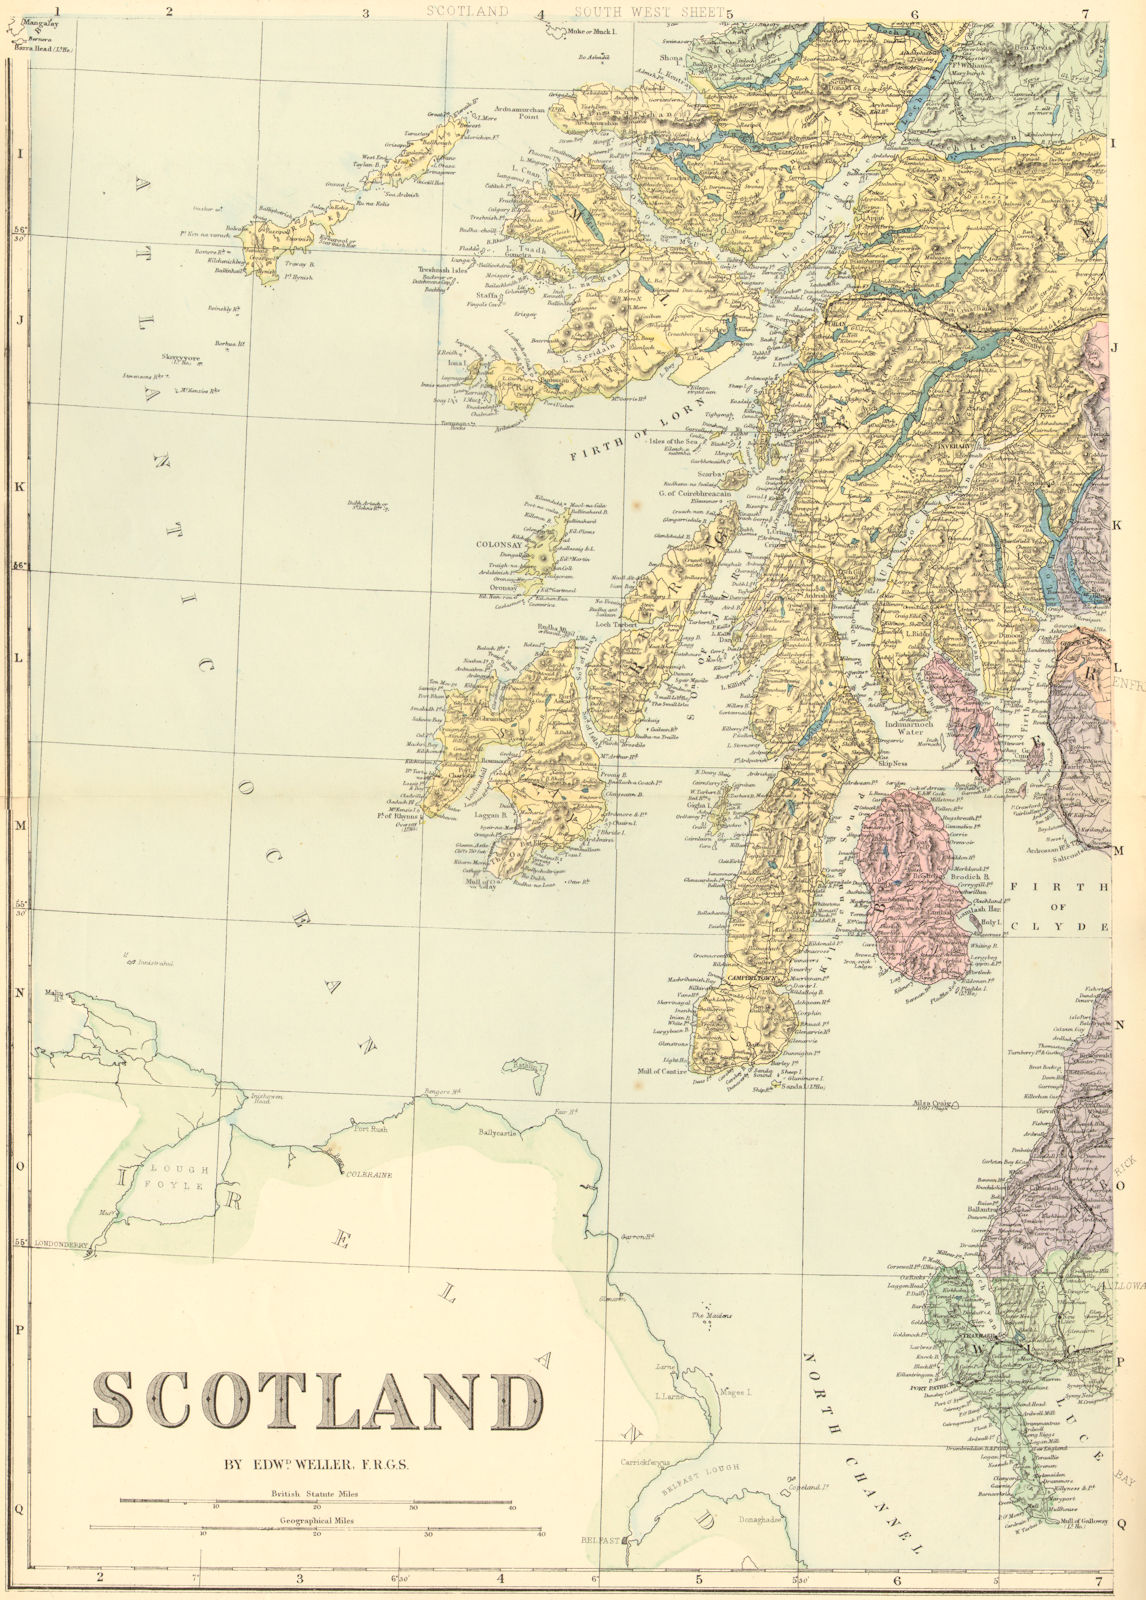 Associate Product SCOTLAND (South West). Argyll. Bute Islay Jura Mull. GW BACON 1884 old map